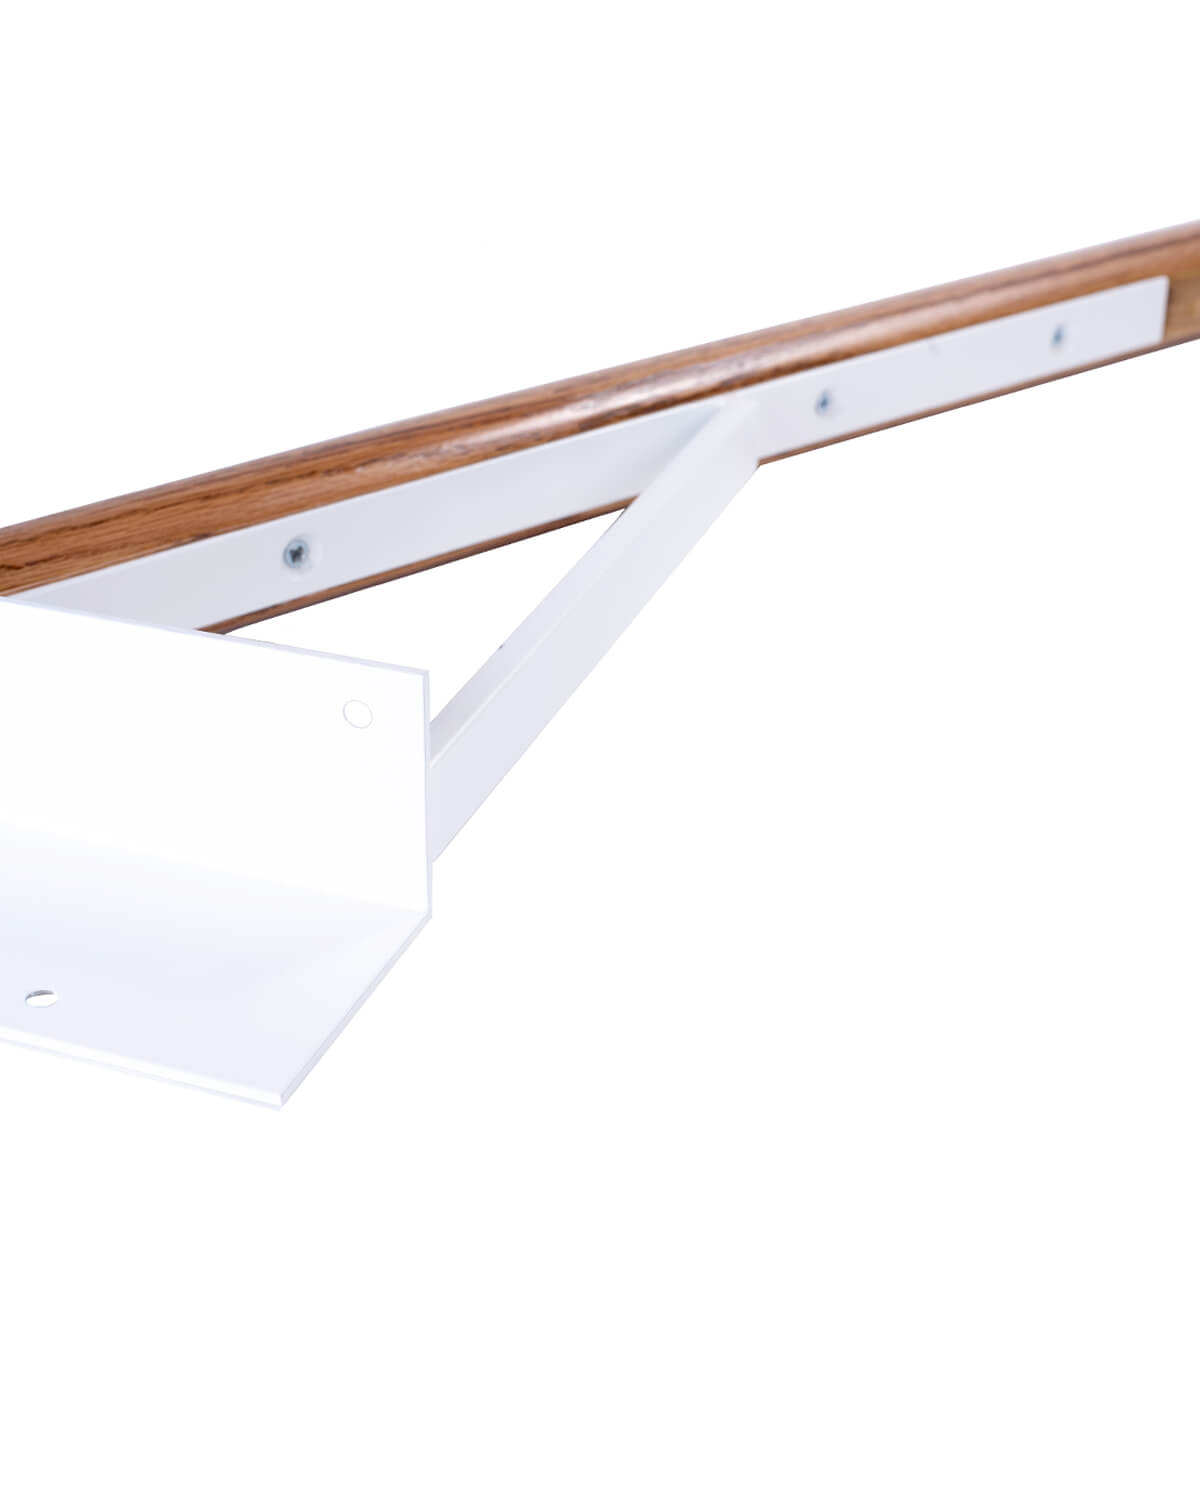 Hold Tight Handrail, Jamb Mount, Solid Oak and White - Hold-Tight Handrails 